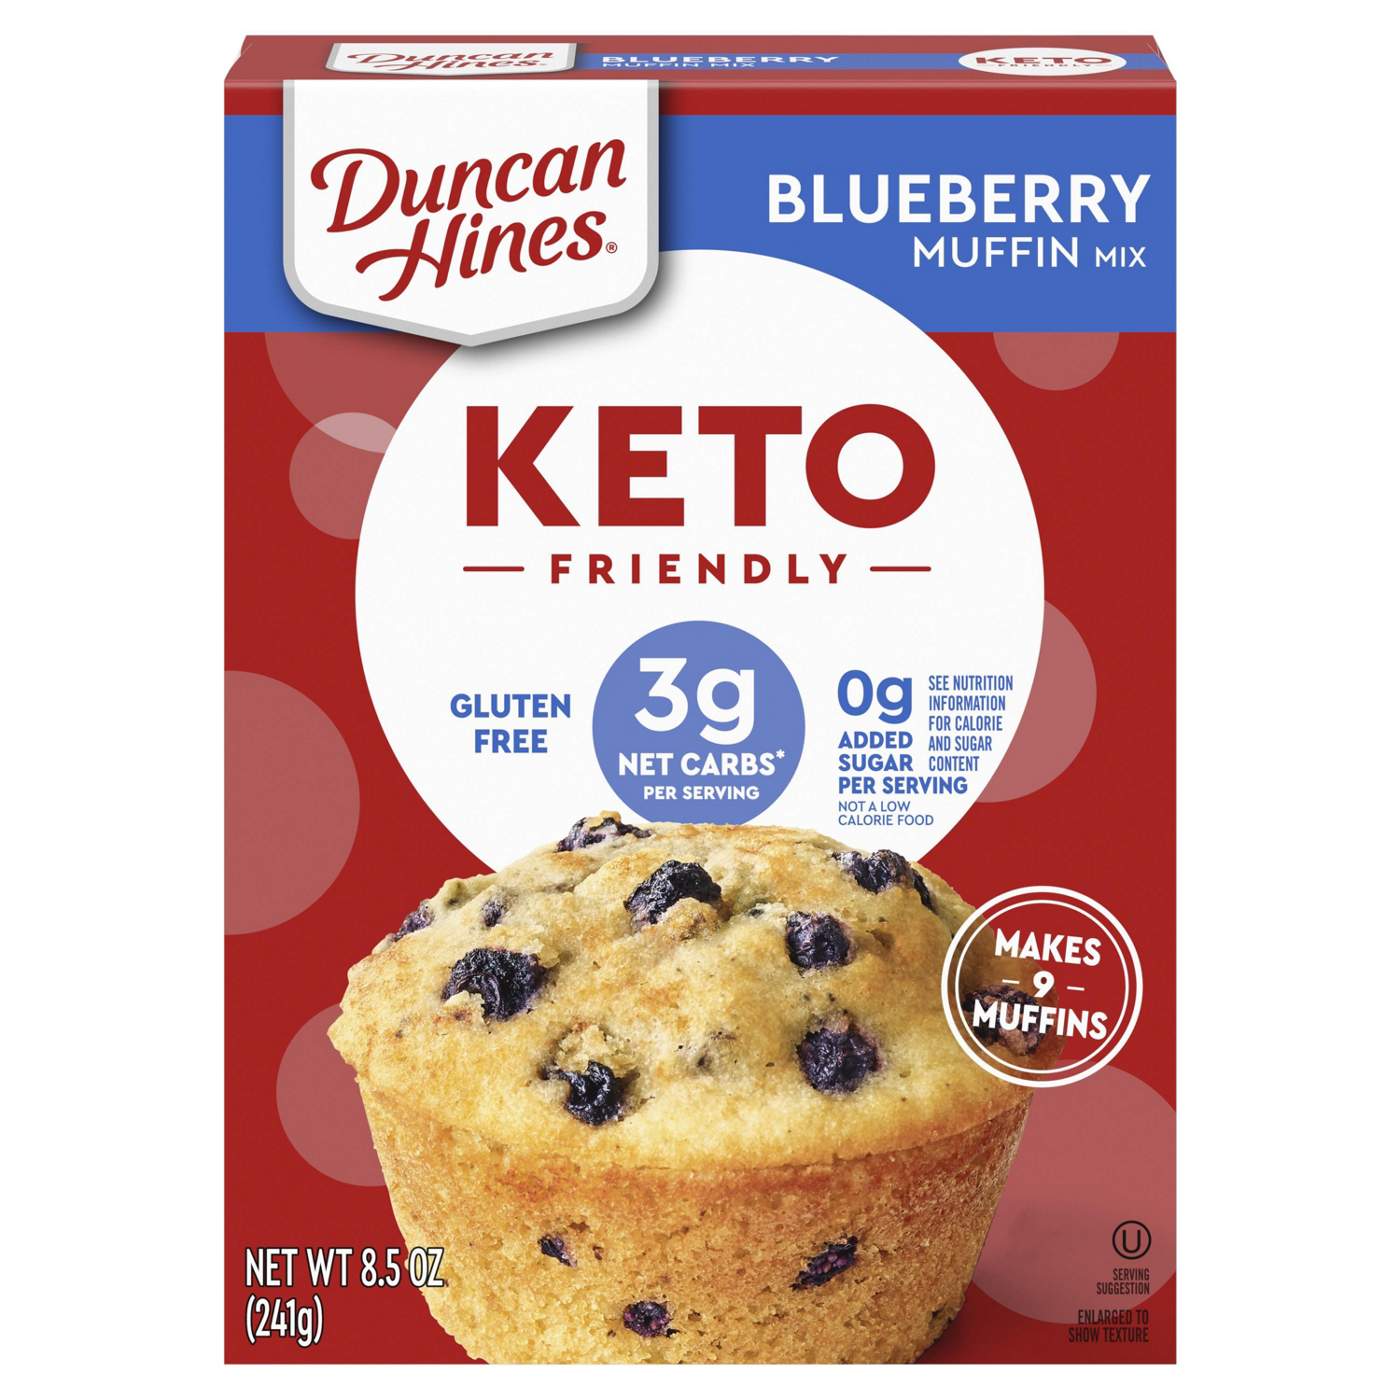 Duncan Hines Keto Friendly Blueberry Muffin Mix; image 1 of 5